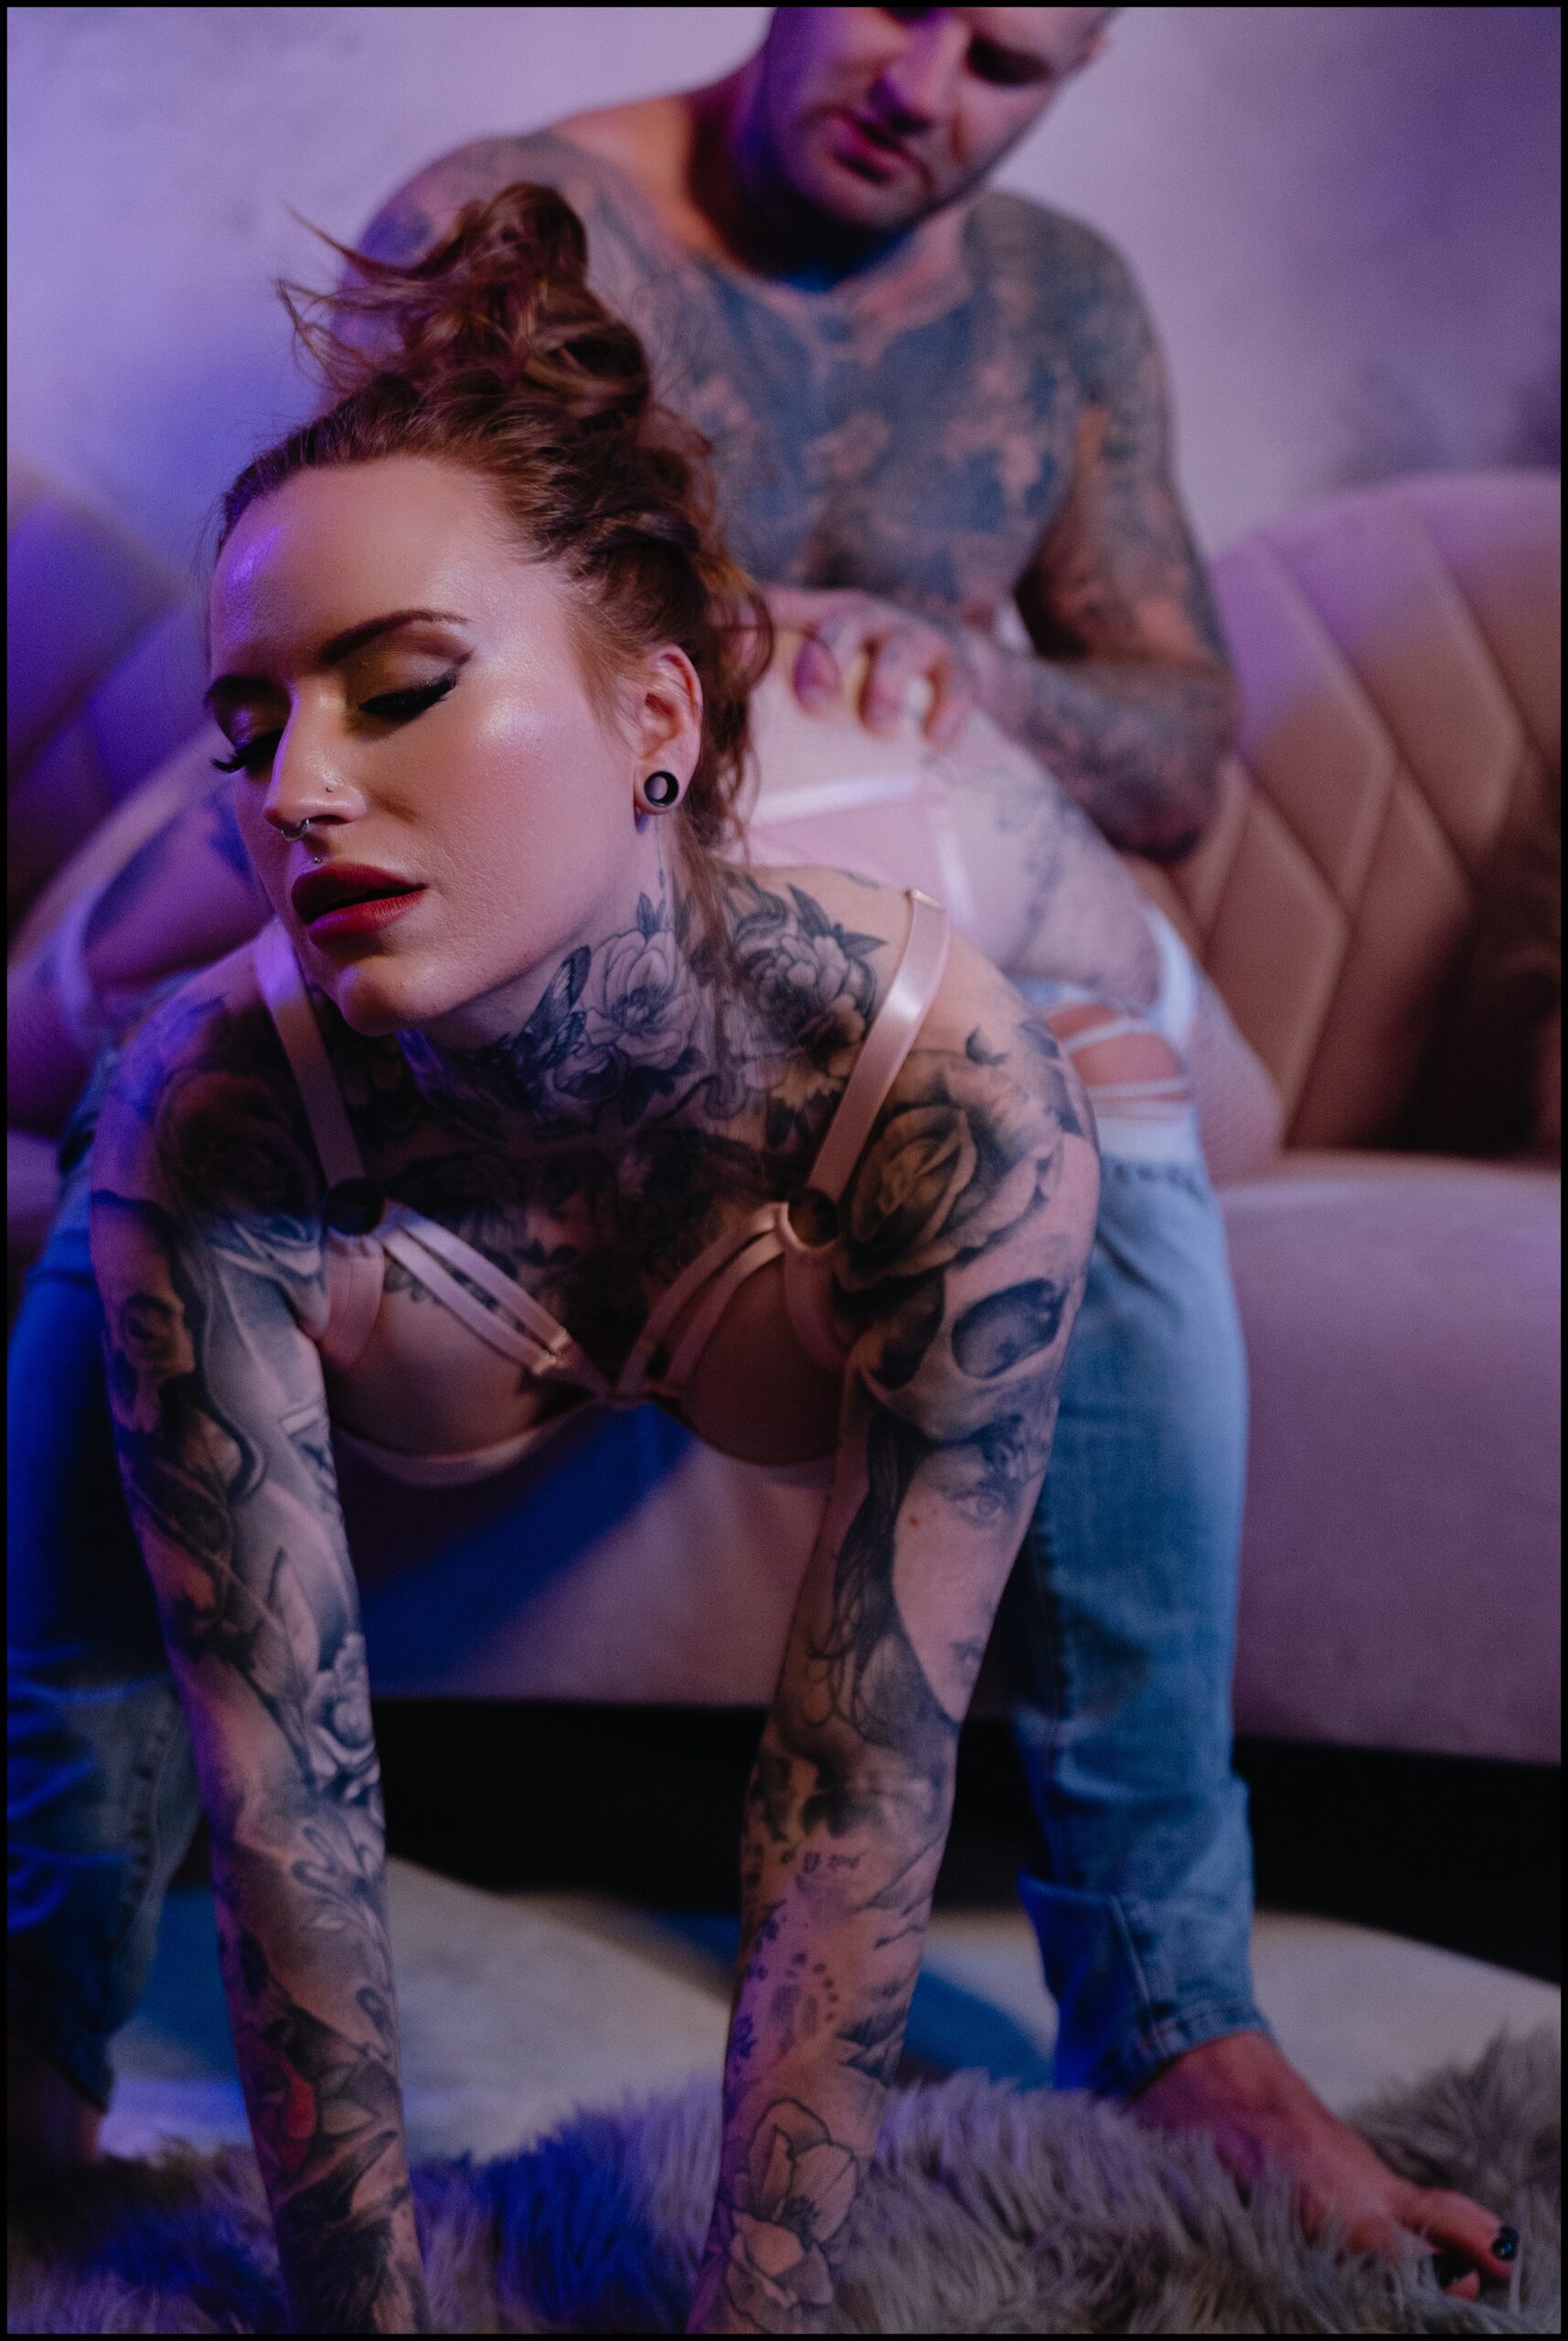 A Tattooed Couple Embraces during their intimate couples boudoir photoshoot. 